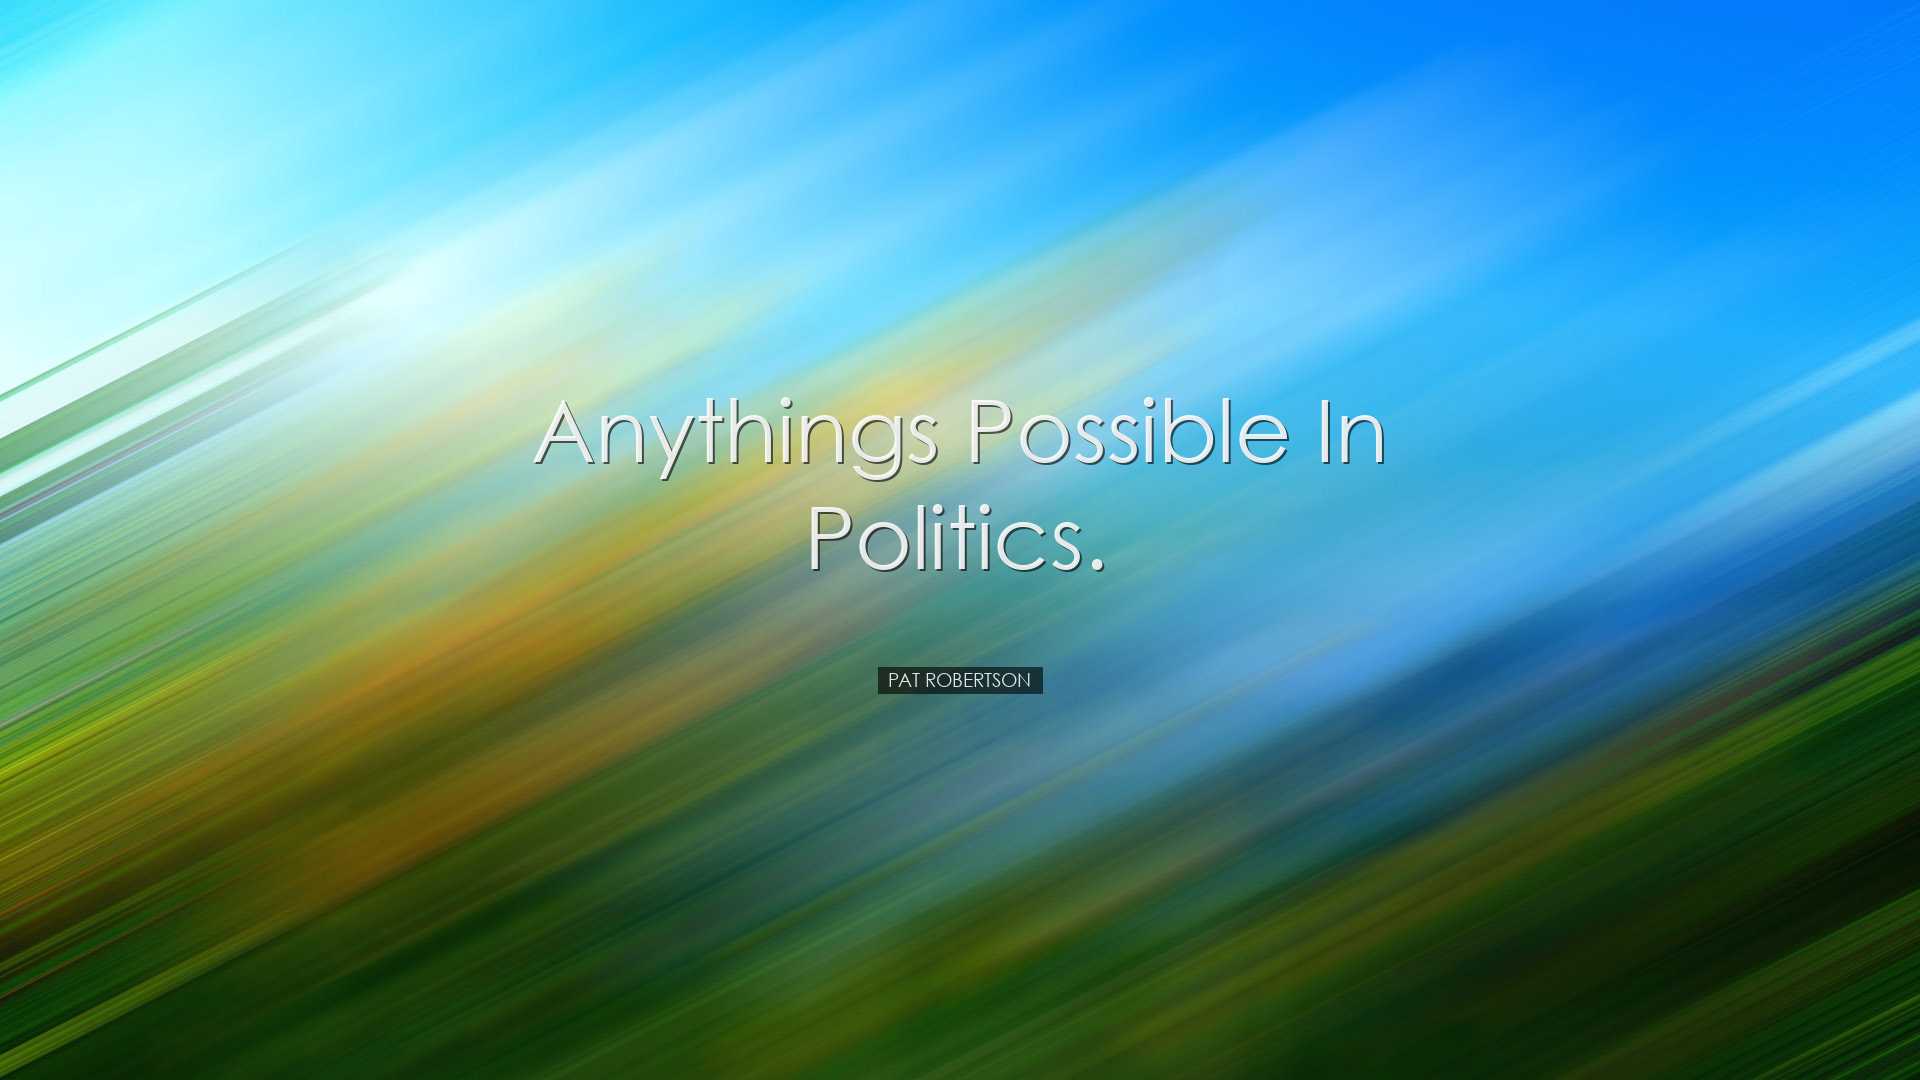 Anythings possible in politics. - Pat Robertson